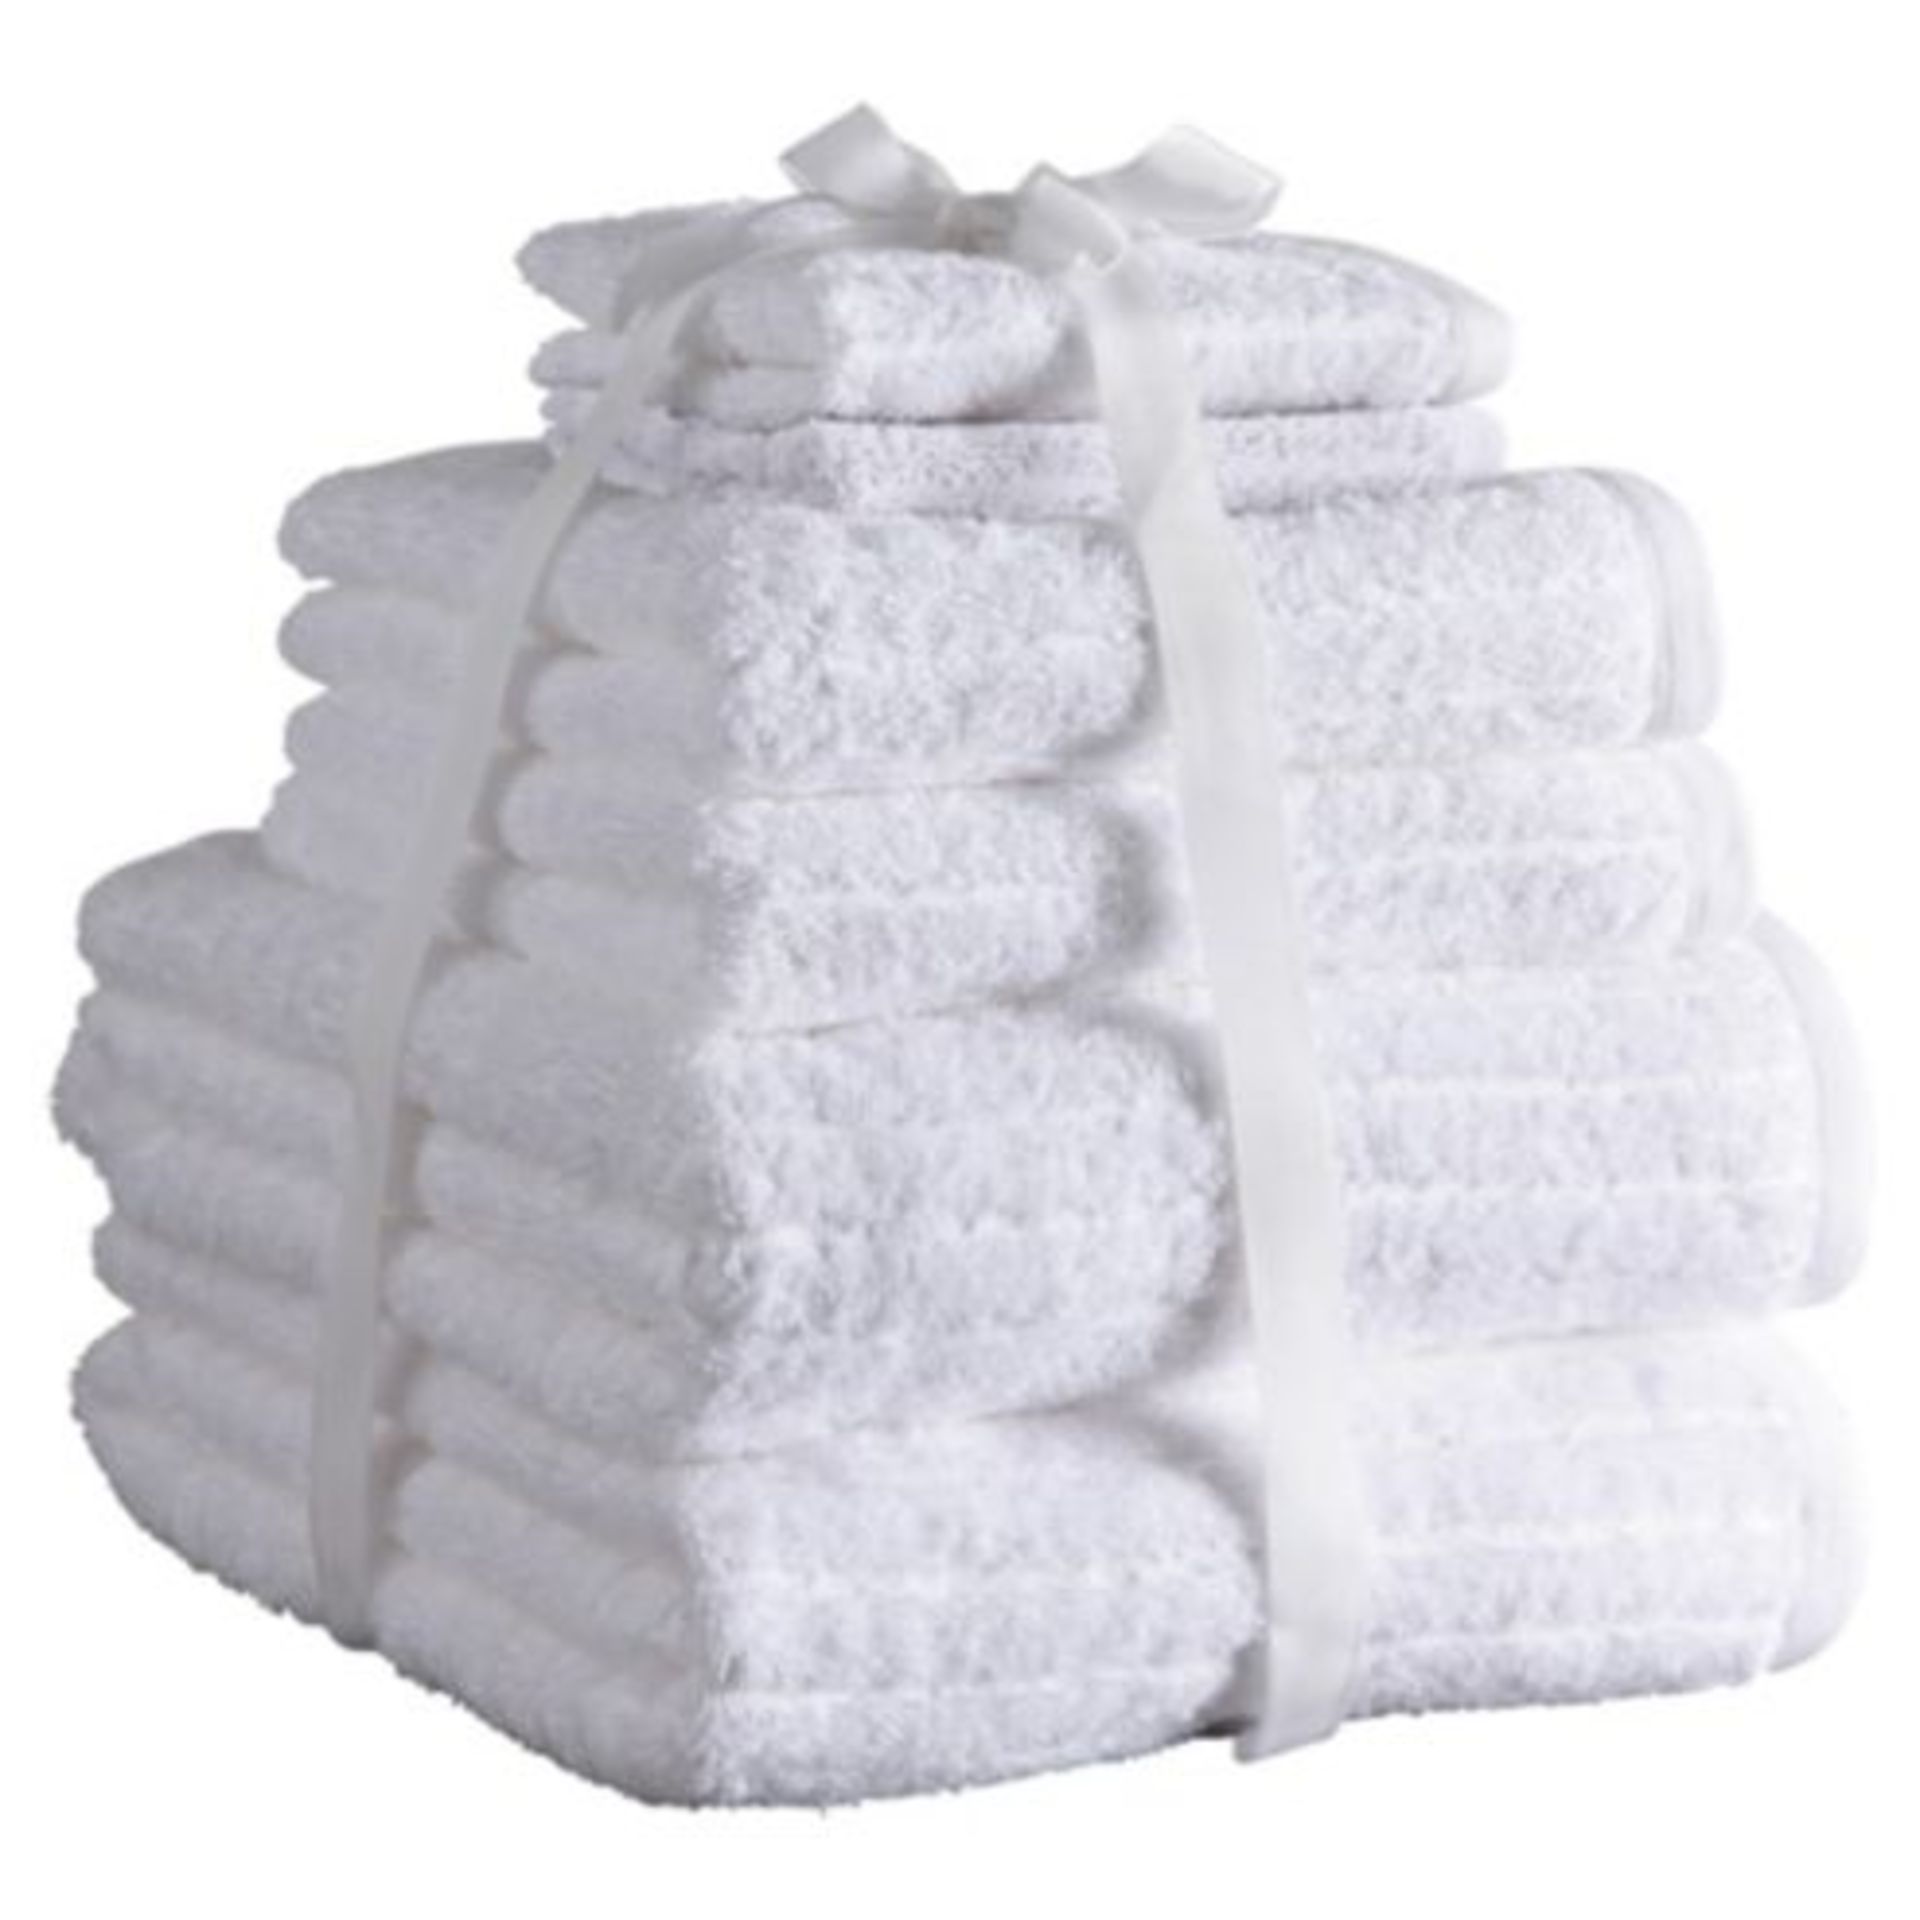 V Brand New Six Piece White Towel Bale Set including 2 Bath Towels 2 Hand Towels and Two Face Towels